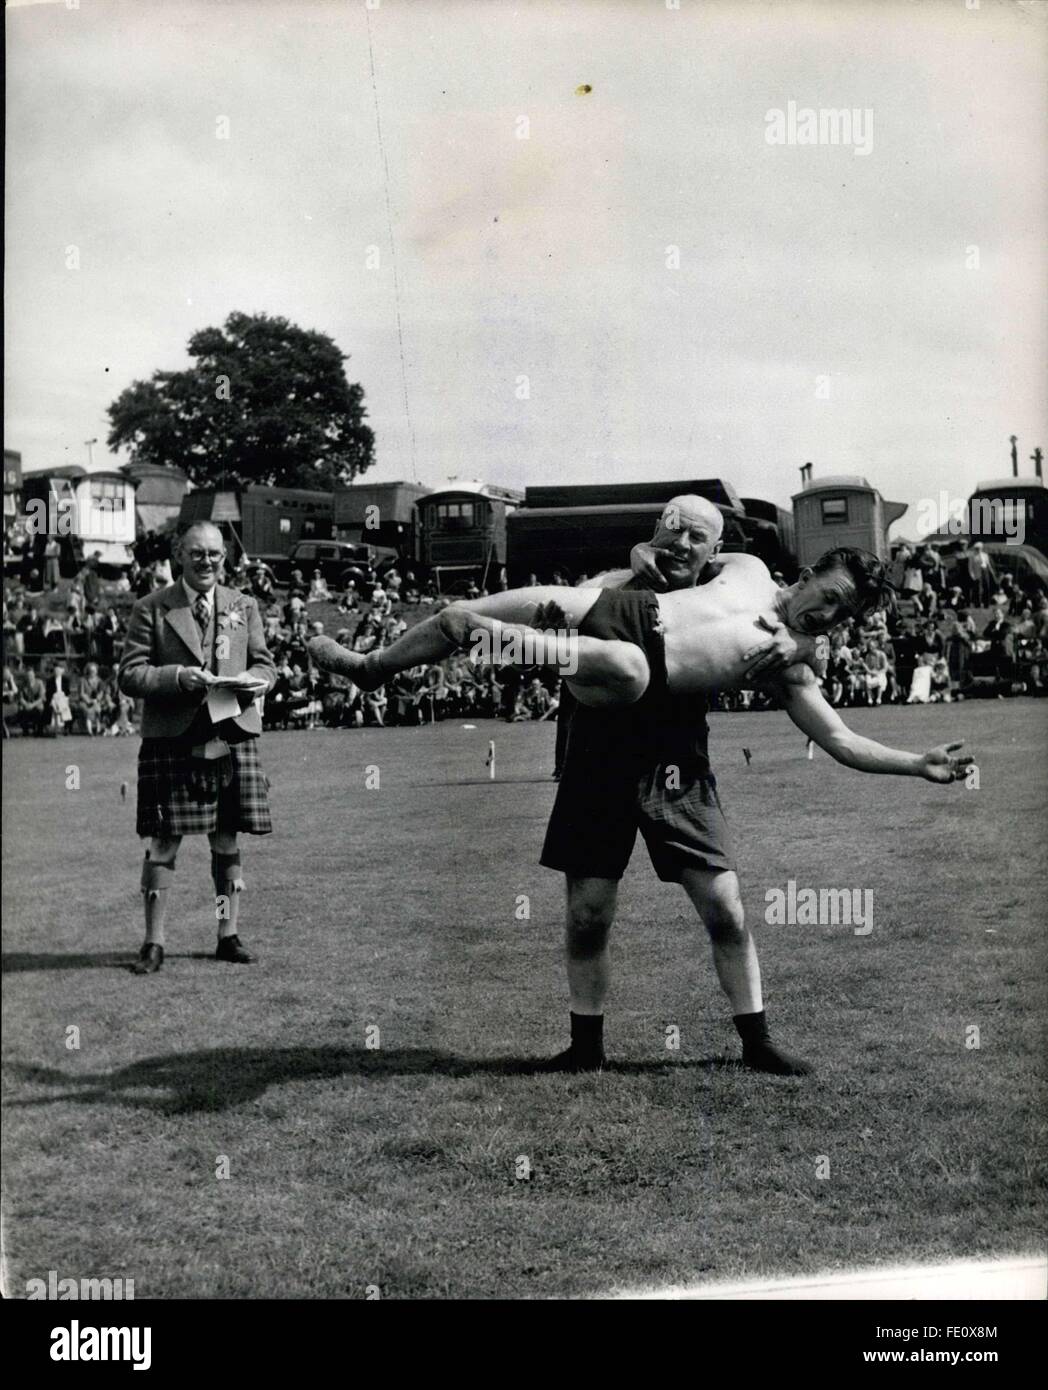 1973 - Crieff Highland gathering at Market Park, Crieff. Laurence McGregor, aged 59, the oldest competitor, of Dunfermline, winning the Catch-as-Catch-Can wrestling event. He is twirling Donald Wilson of Dunblane round and round. © Keystone Pictures USA/ZUMAPRESS.com/Alamy Live News Stock Photo